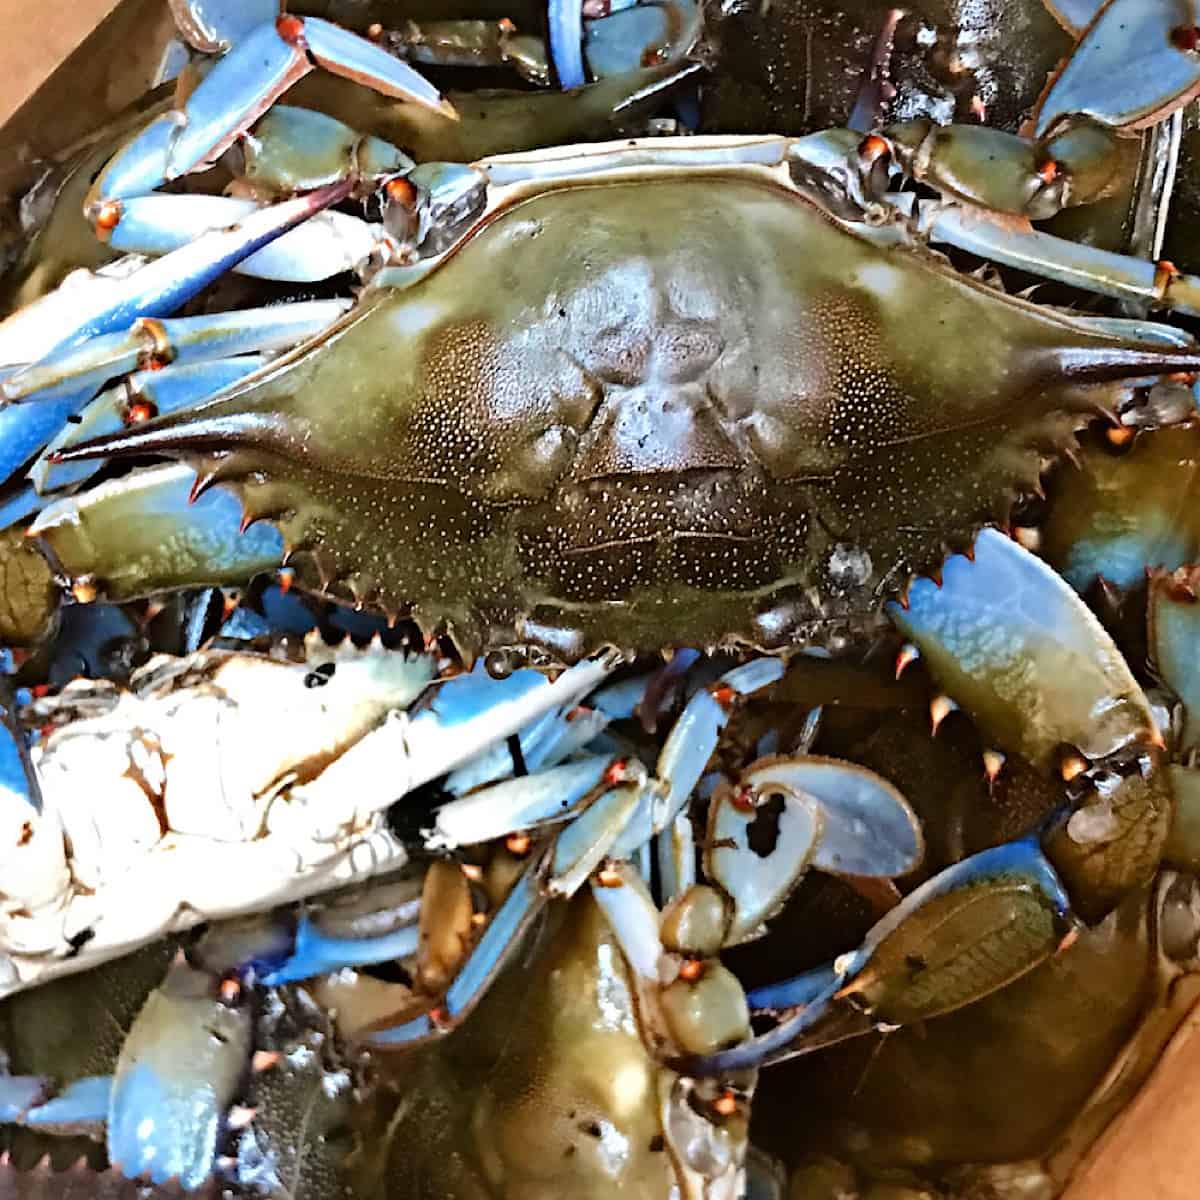 Live blue crabs for shrimp and crab gumbo